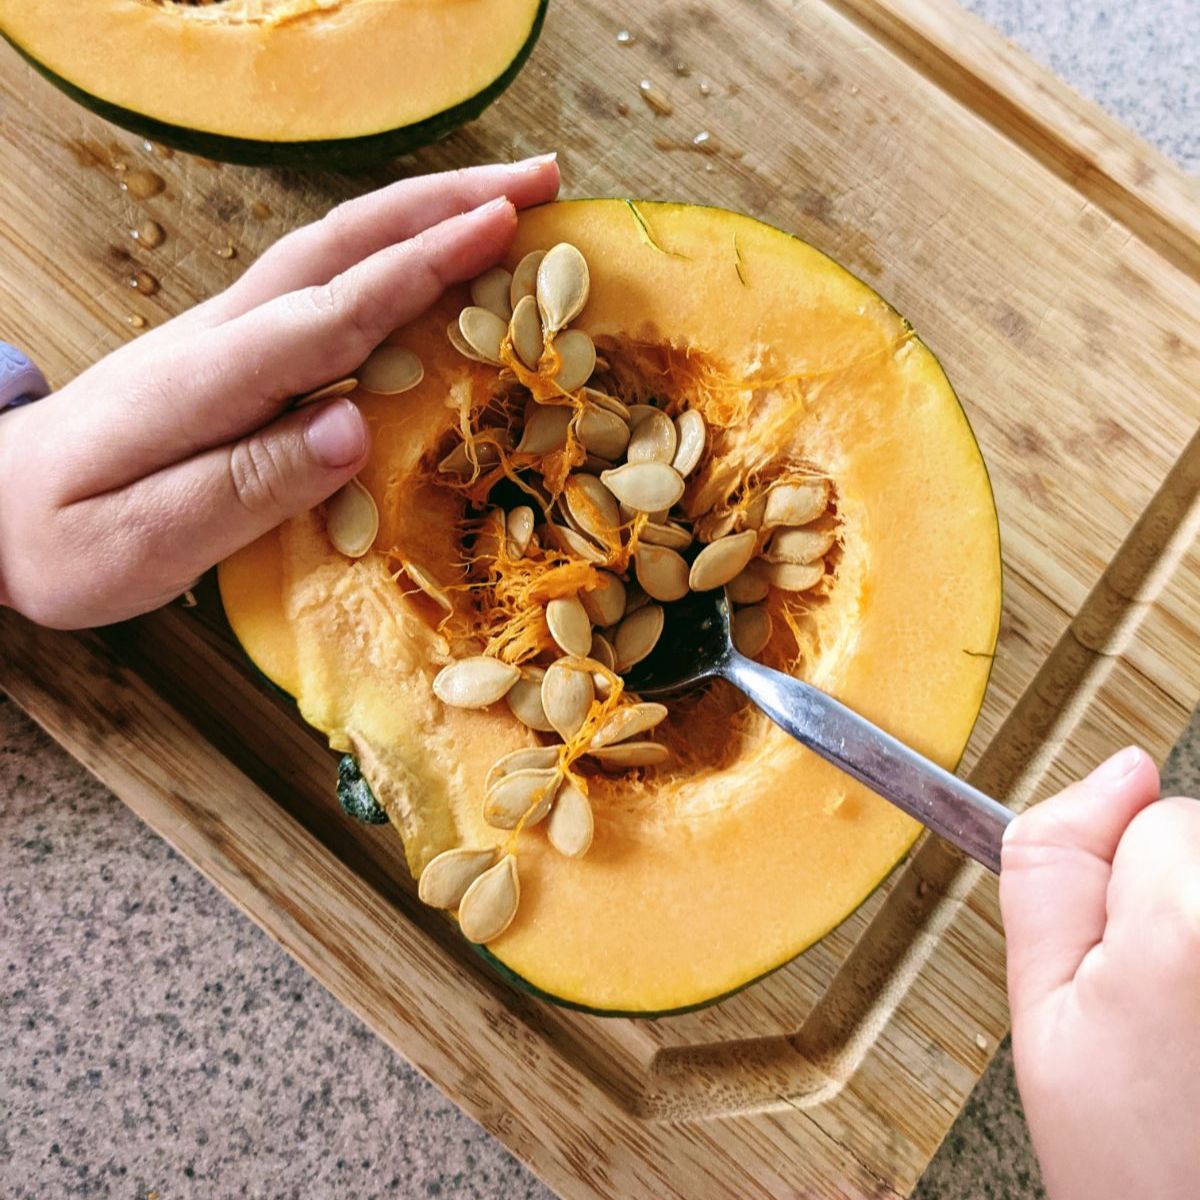 Saving Acorn Squash seeds for planting - daughter scooping seeds out of winter squash